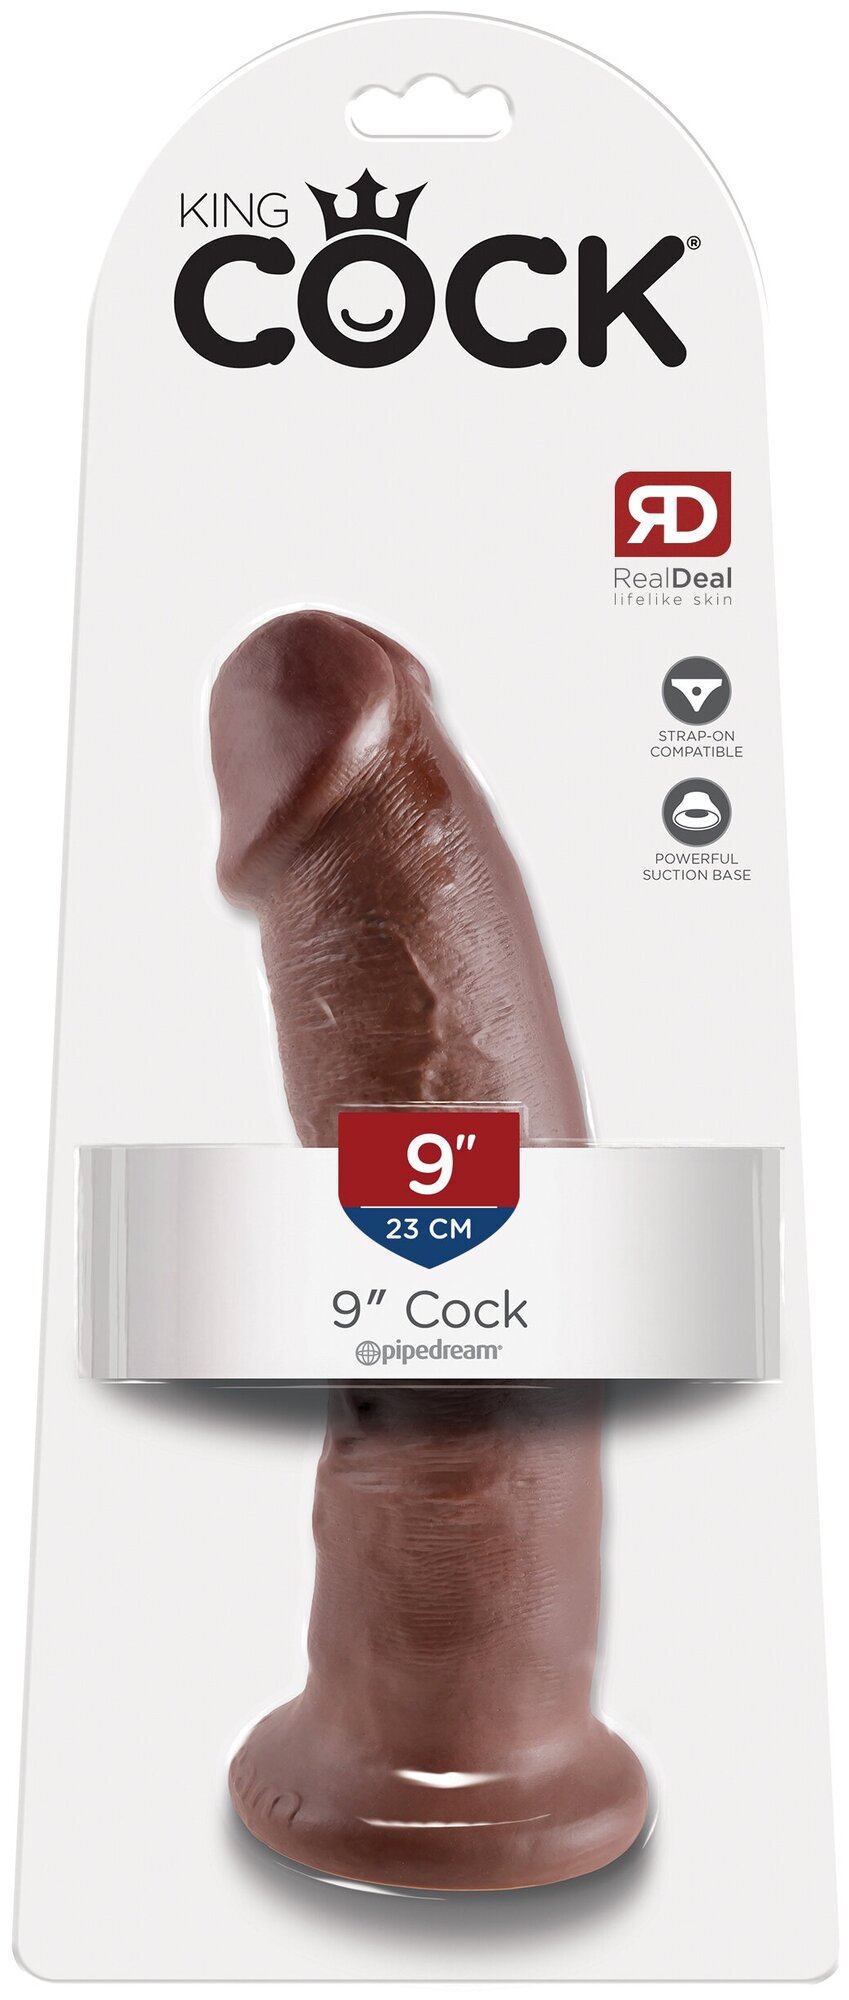 Cock 9